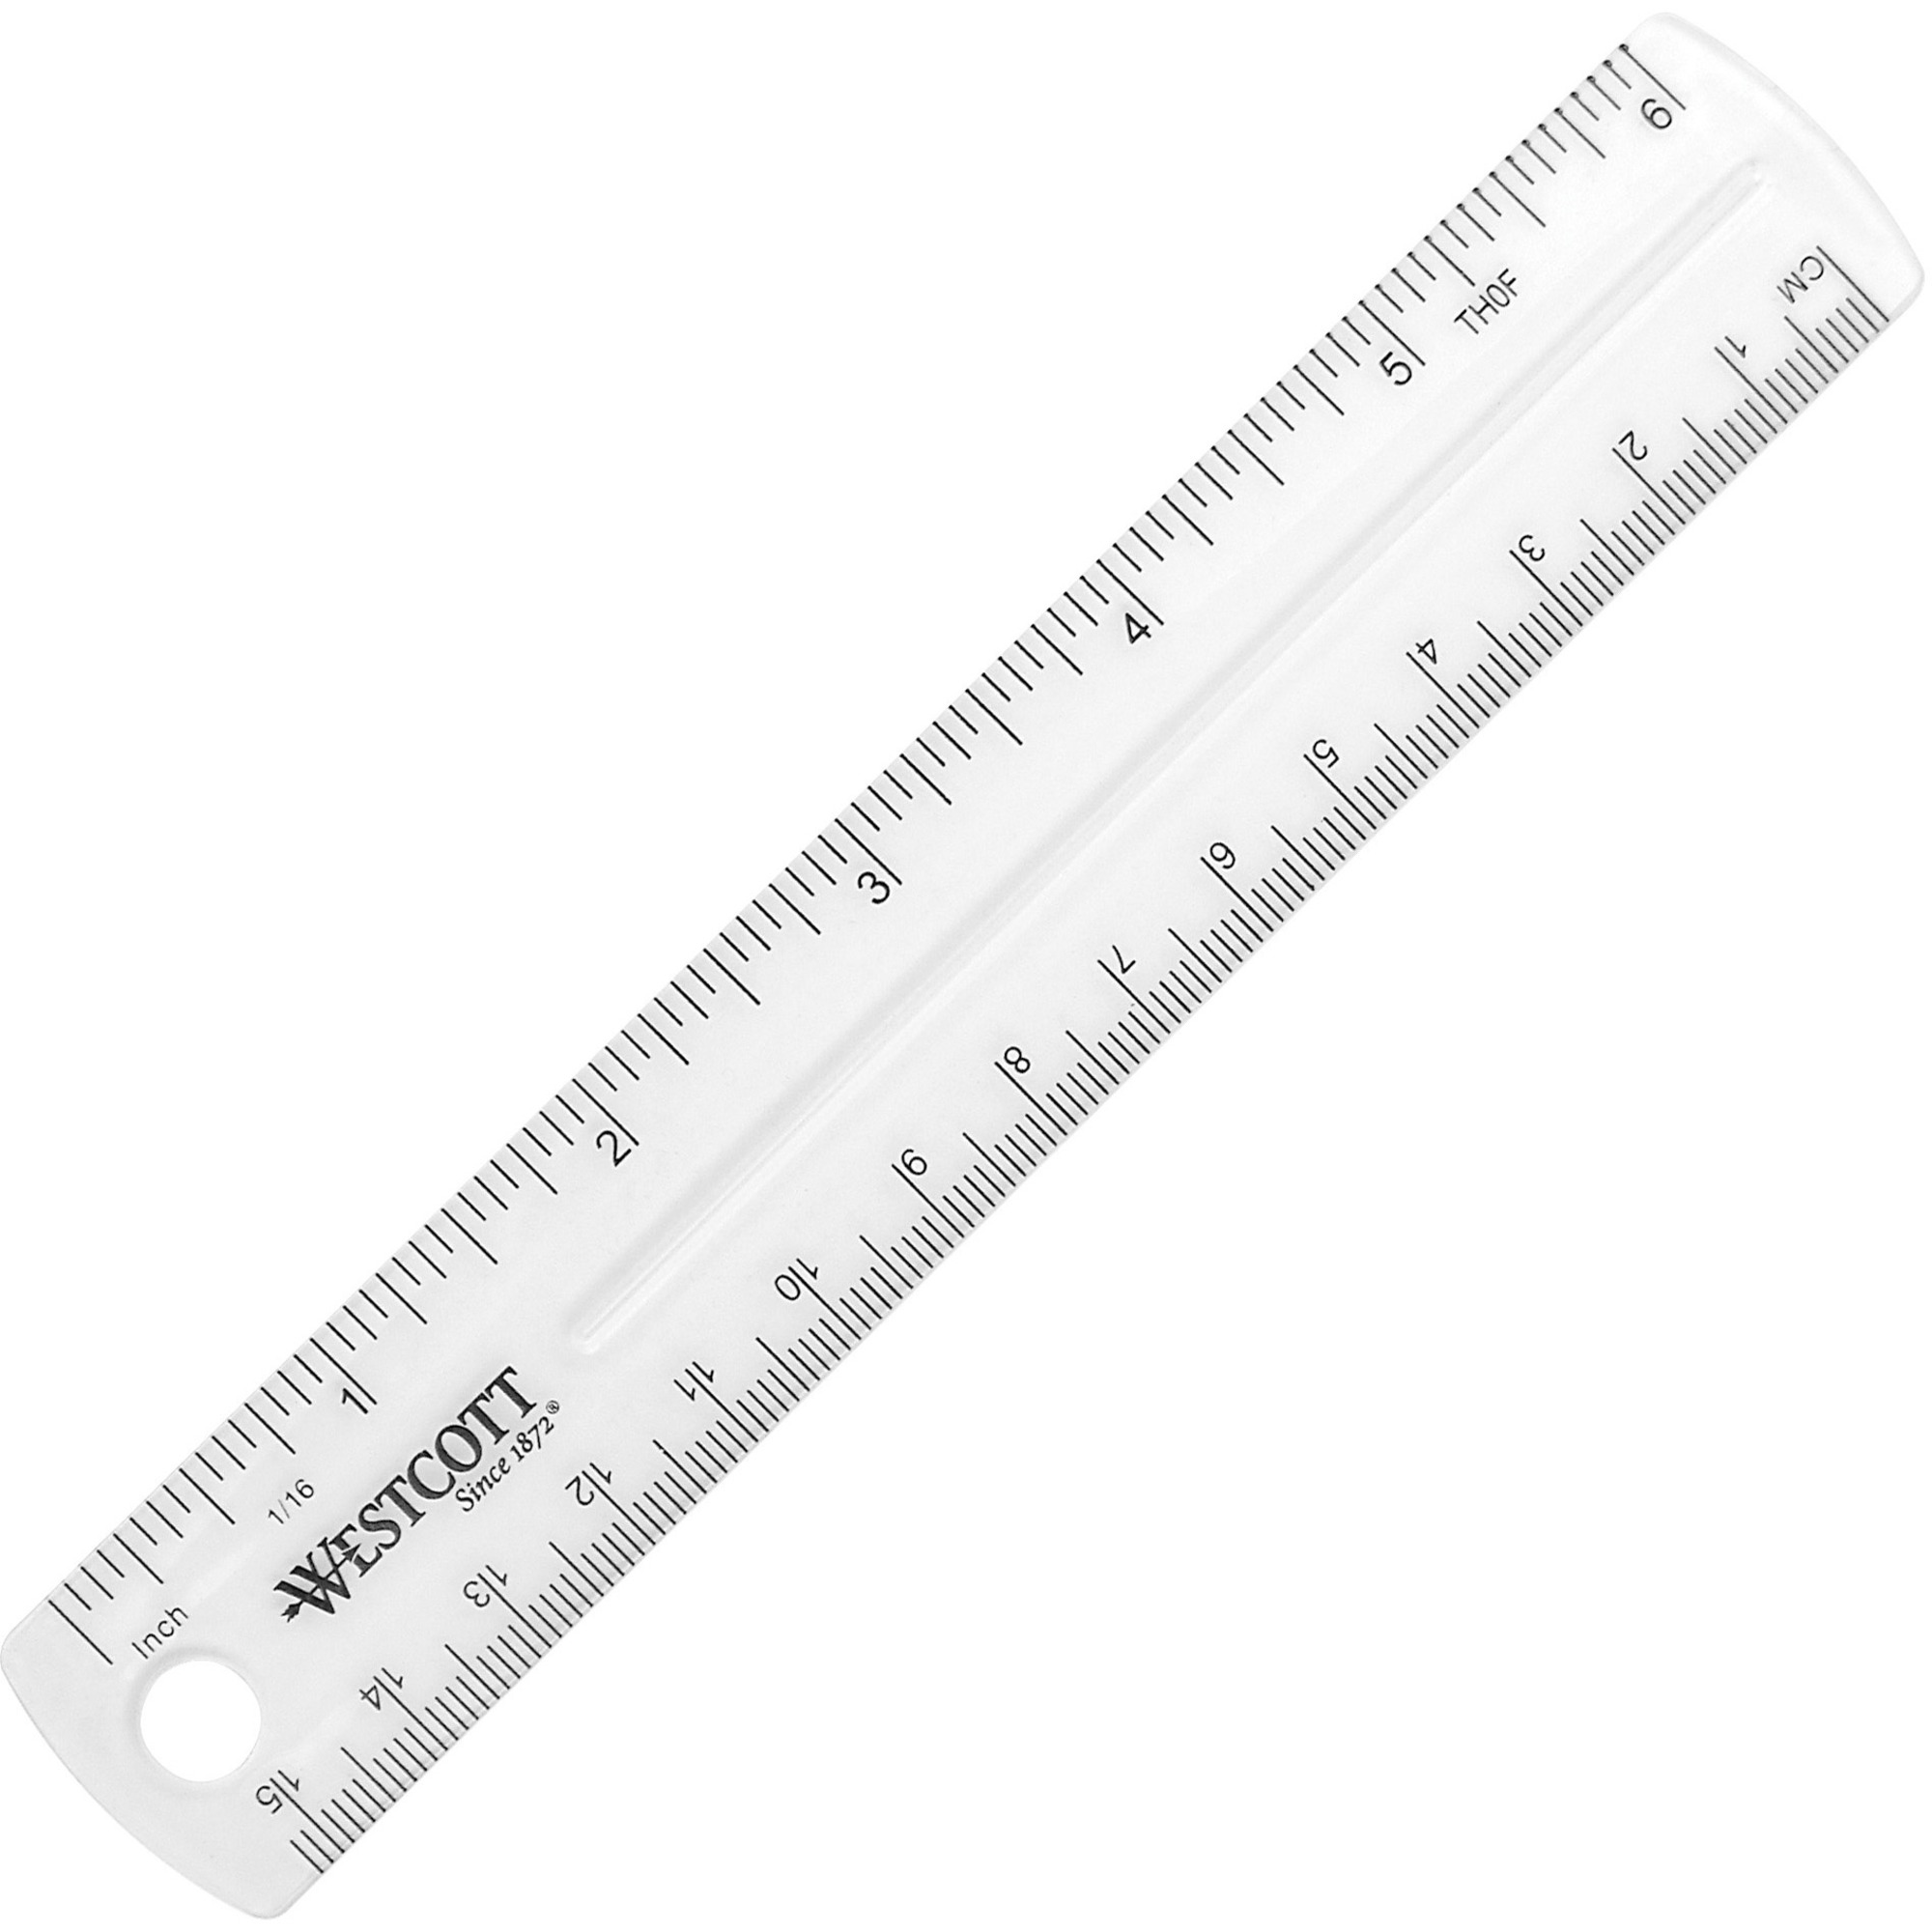 ruler size in real life